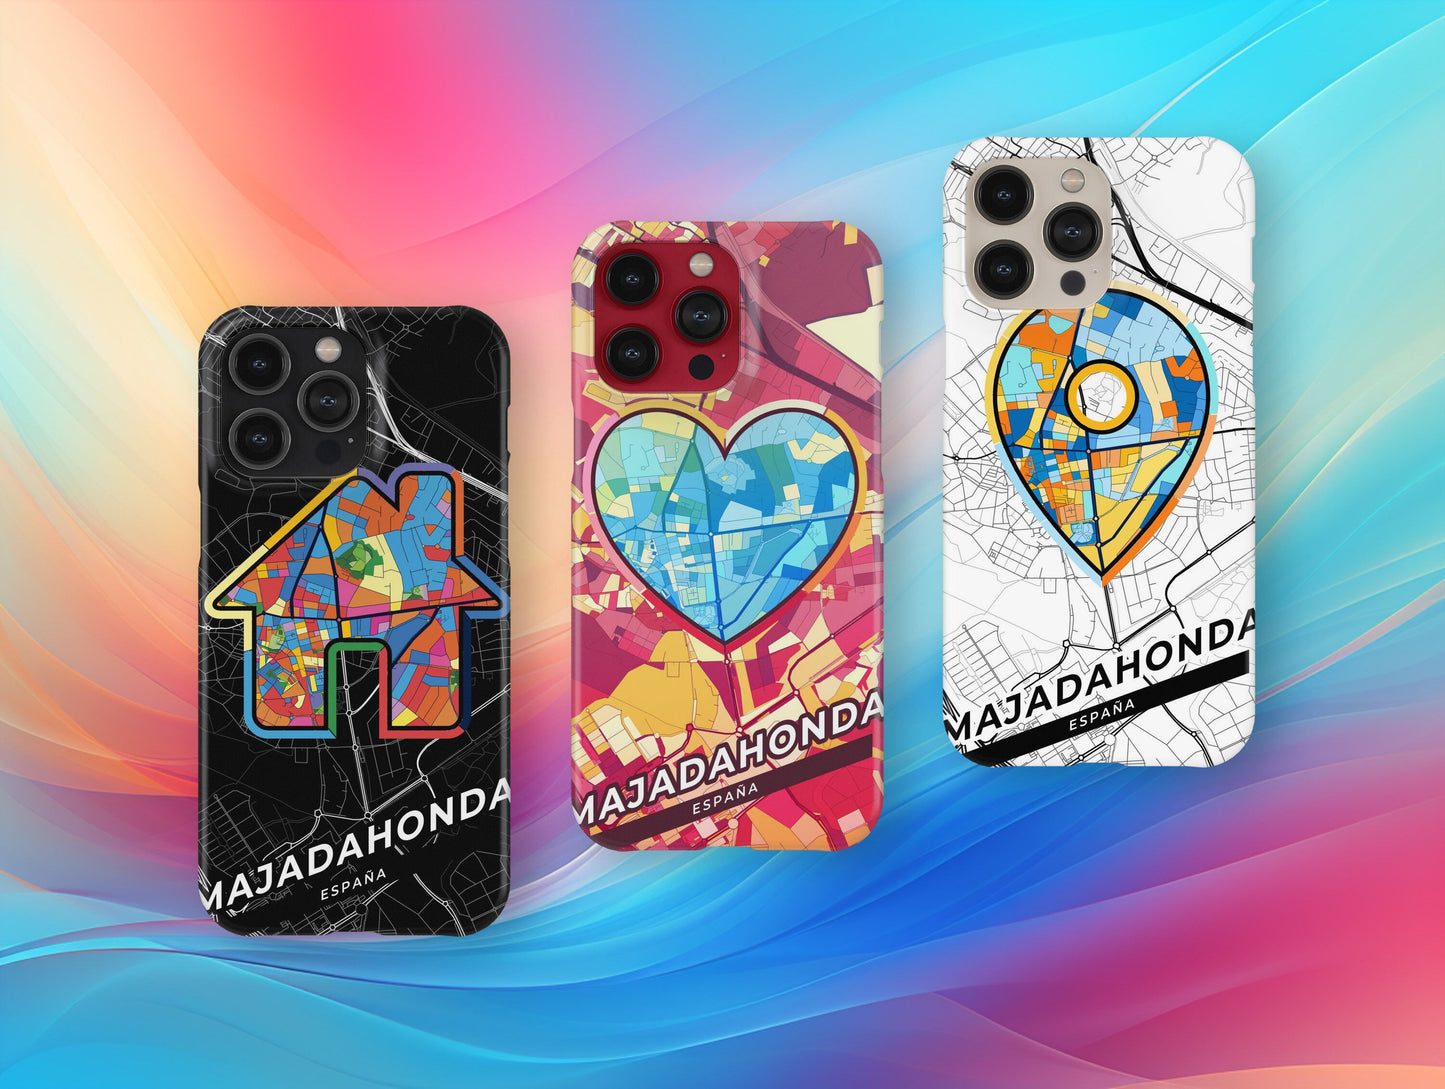 Majadahonda Spain slim phone case with colorful icon. Birthday, wedding or housewarming gift. Couple match cases.